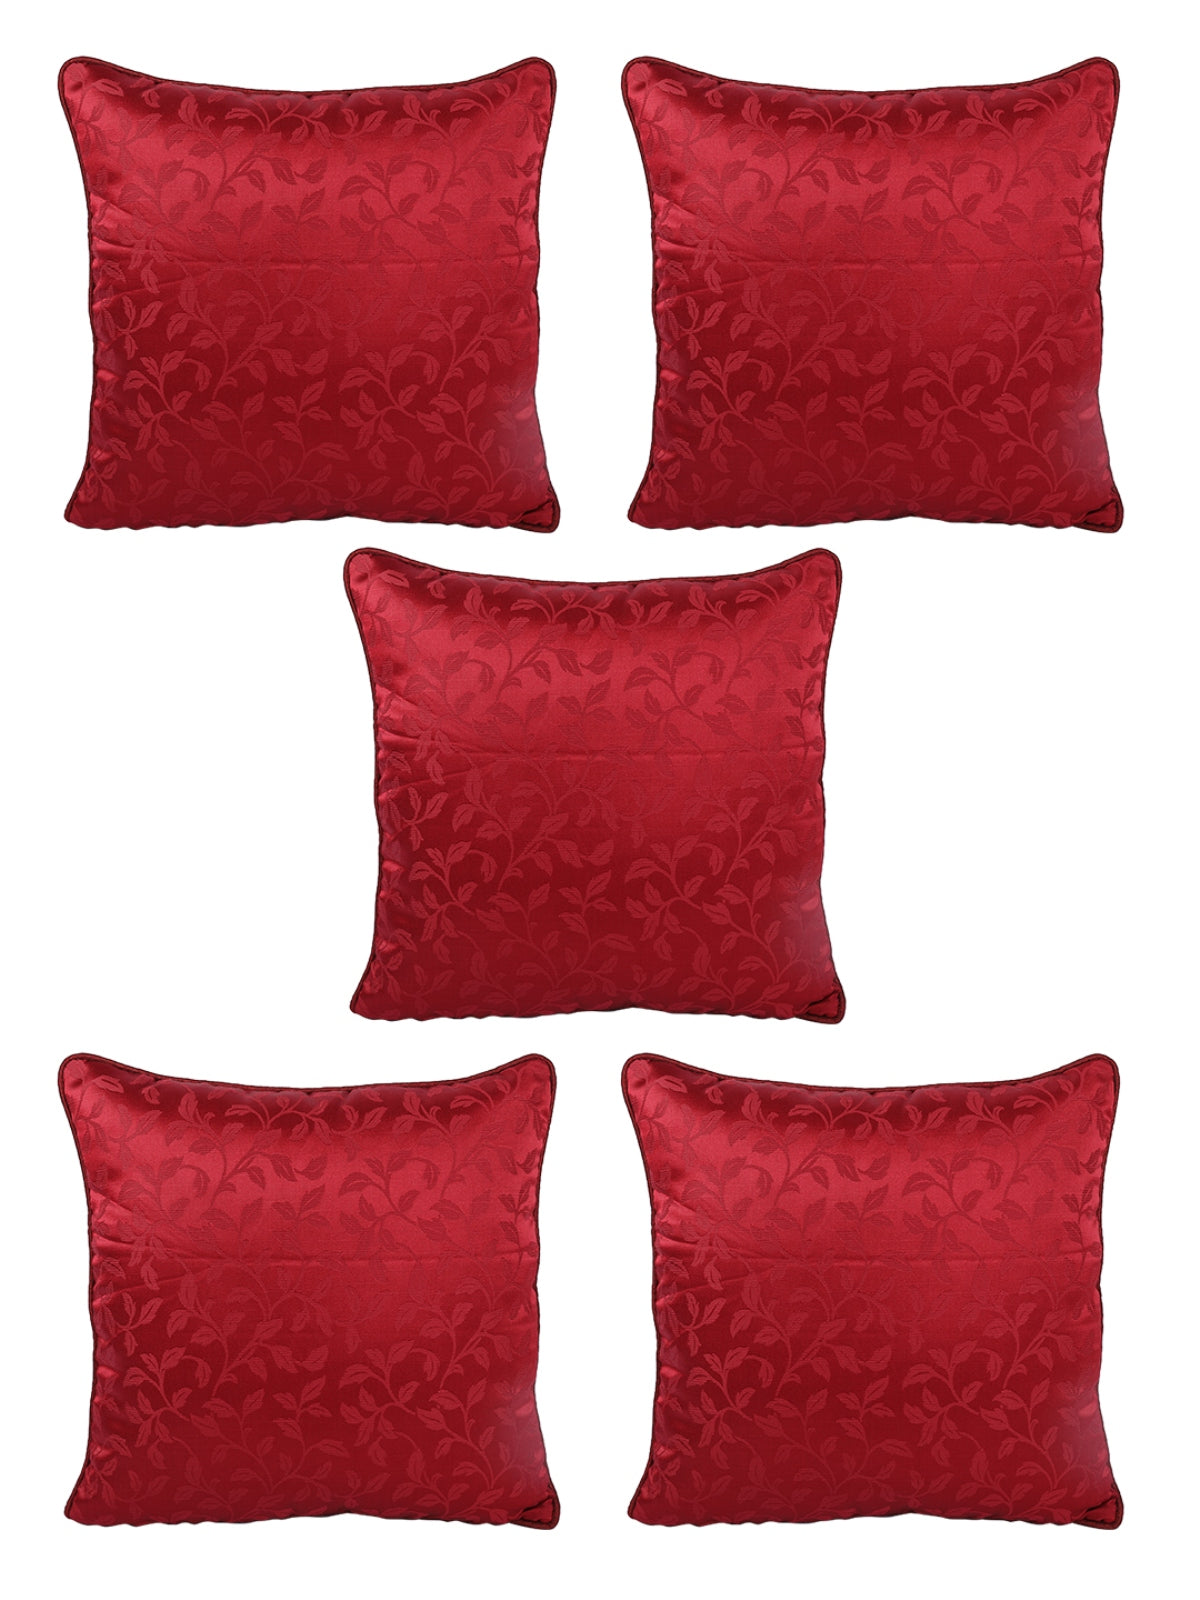 Maroon Set of 5 Jacquard 16 Inch x 16 Inch Cushion Covers